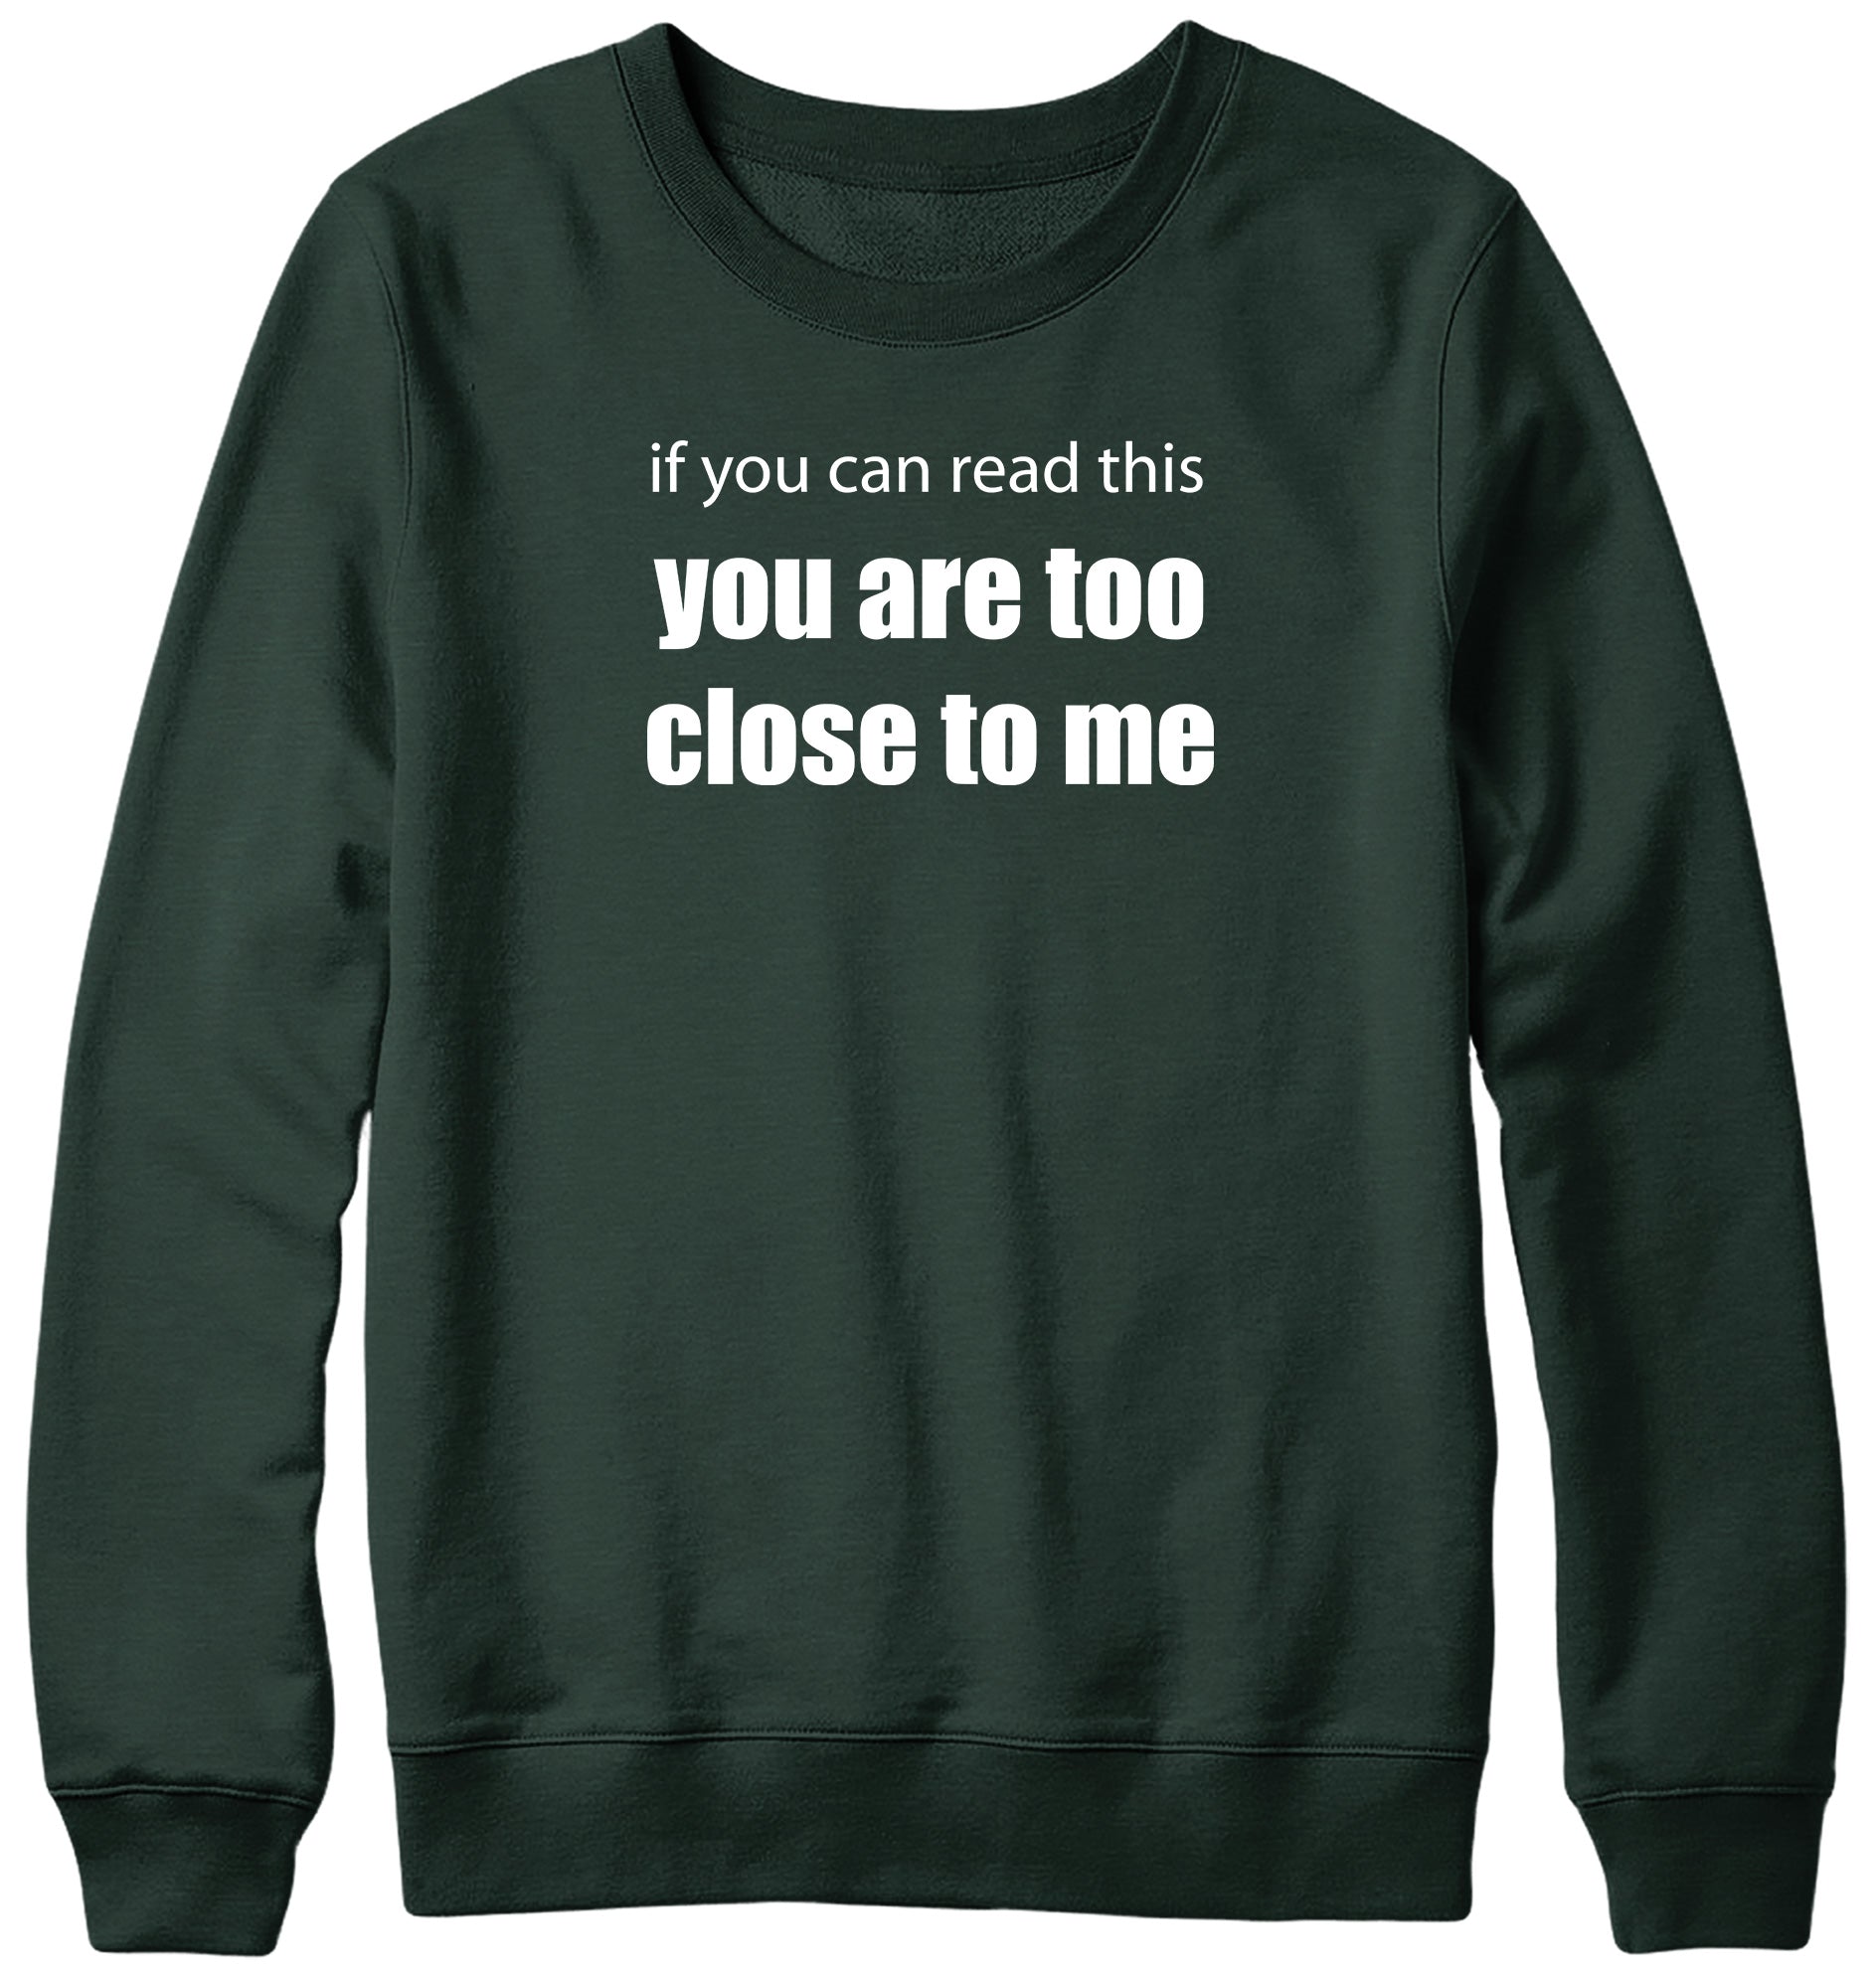 IF YOU CAN READ THIS YOU ARE TOO CLOSE TO ME MENS LADIES WOMENS UNISEX SWEATSHIRT SWEATER